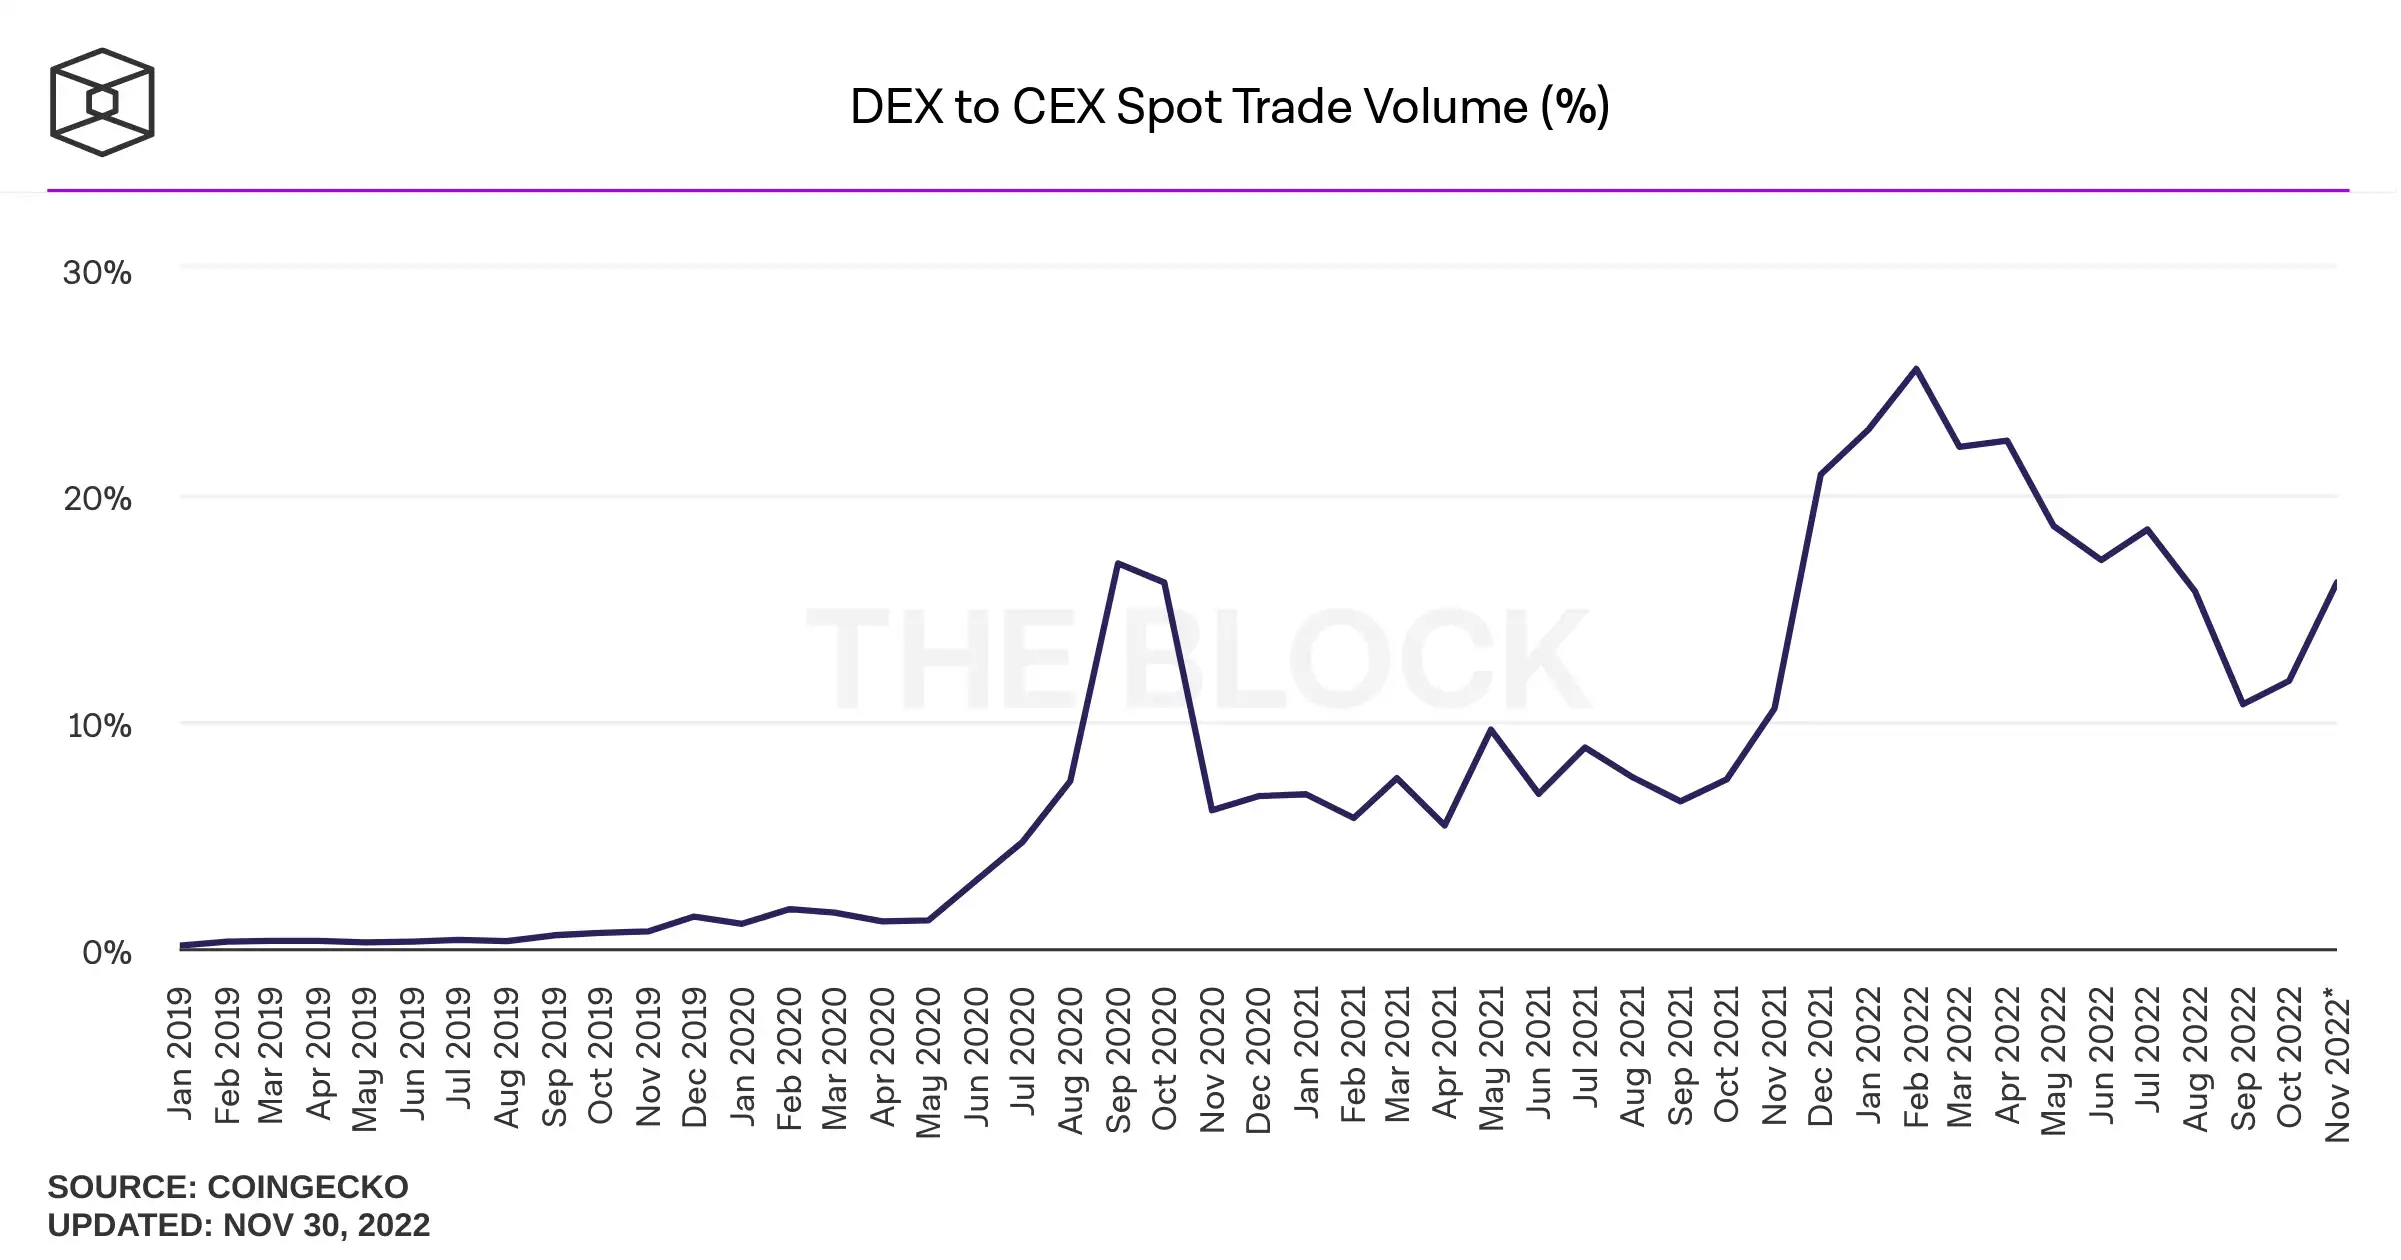 Fig. 1. DEX to CEX Spot Trade Volume (Source: The Block)